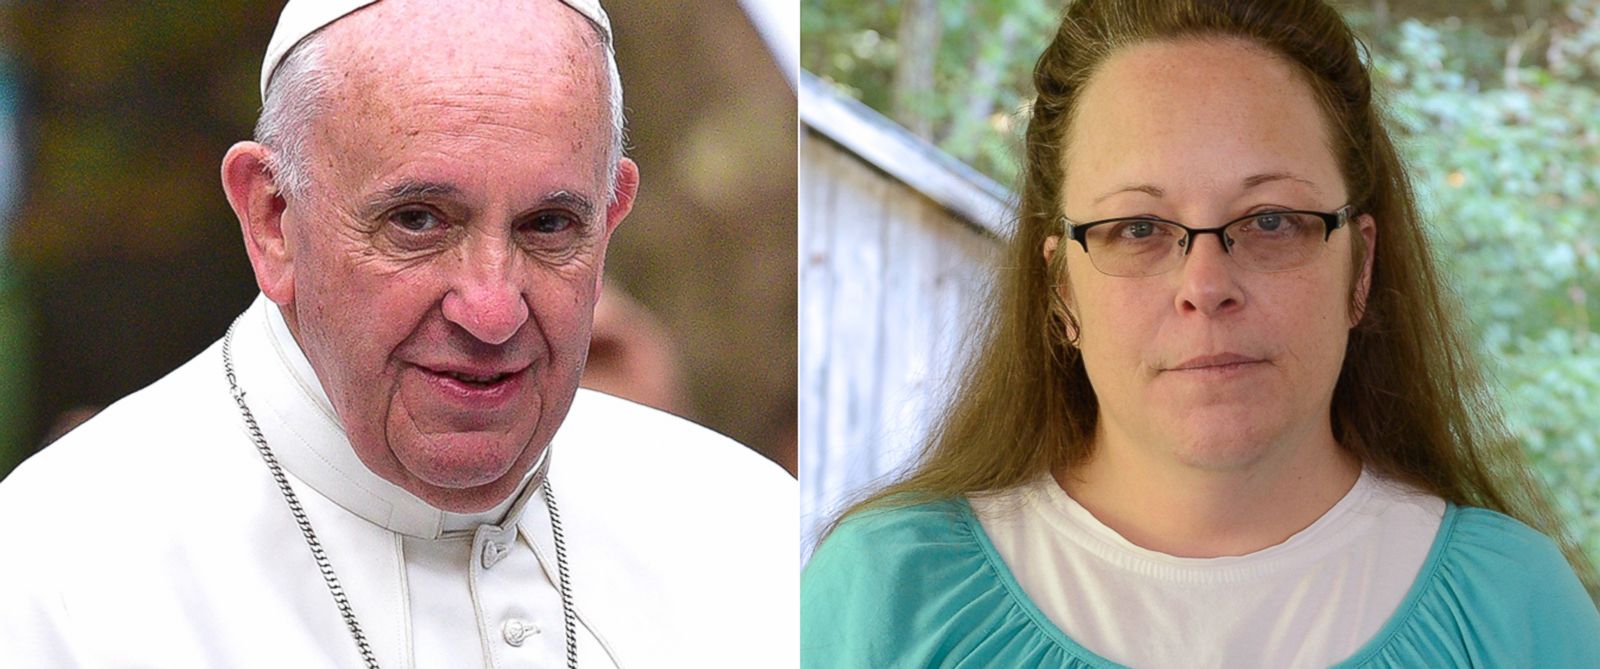 PHOTO: Pictured from left, Pope Francis and Kim Davis.